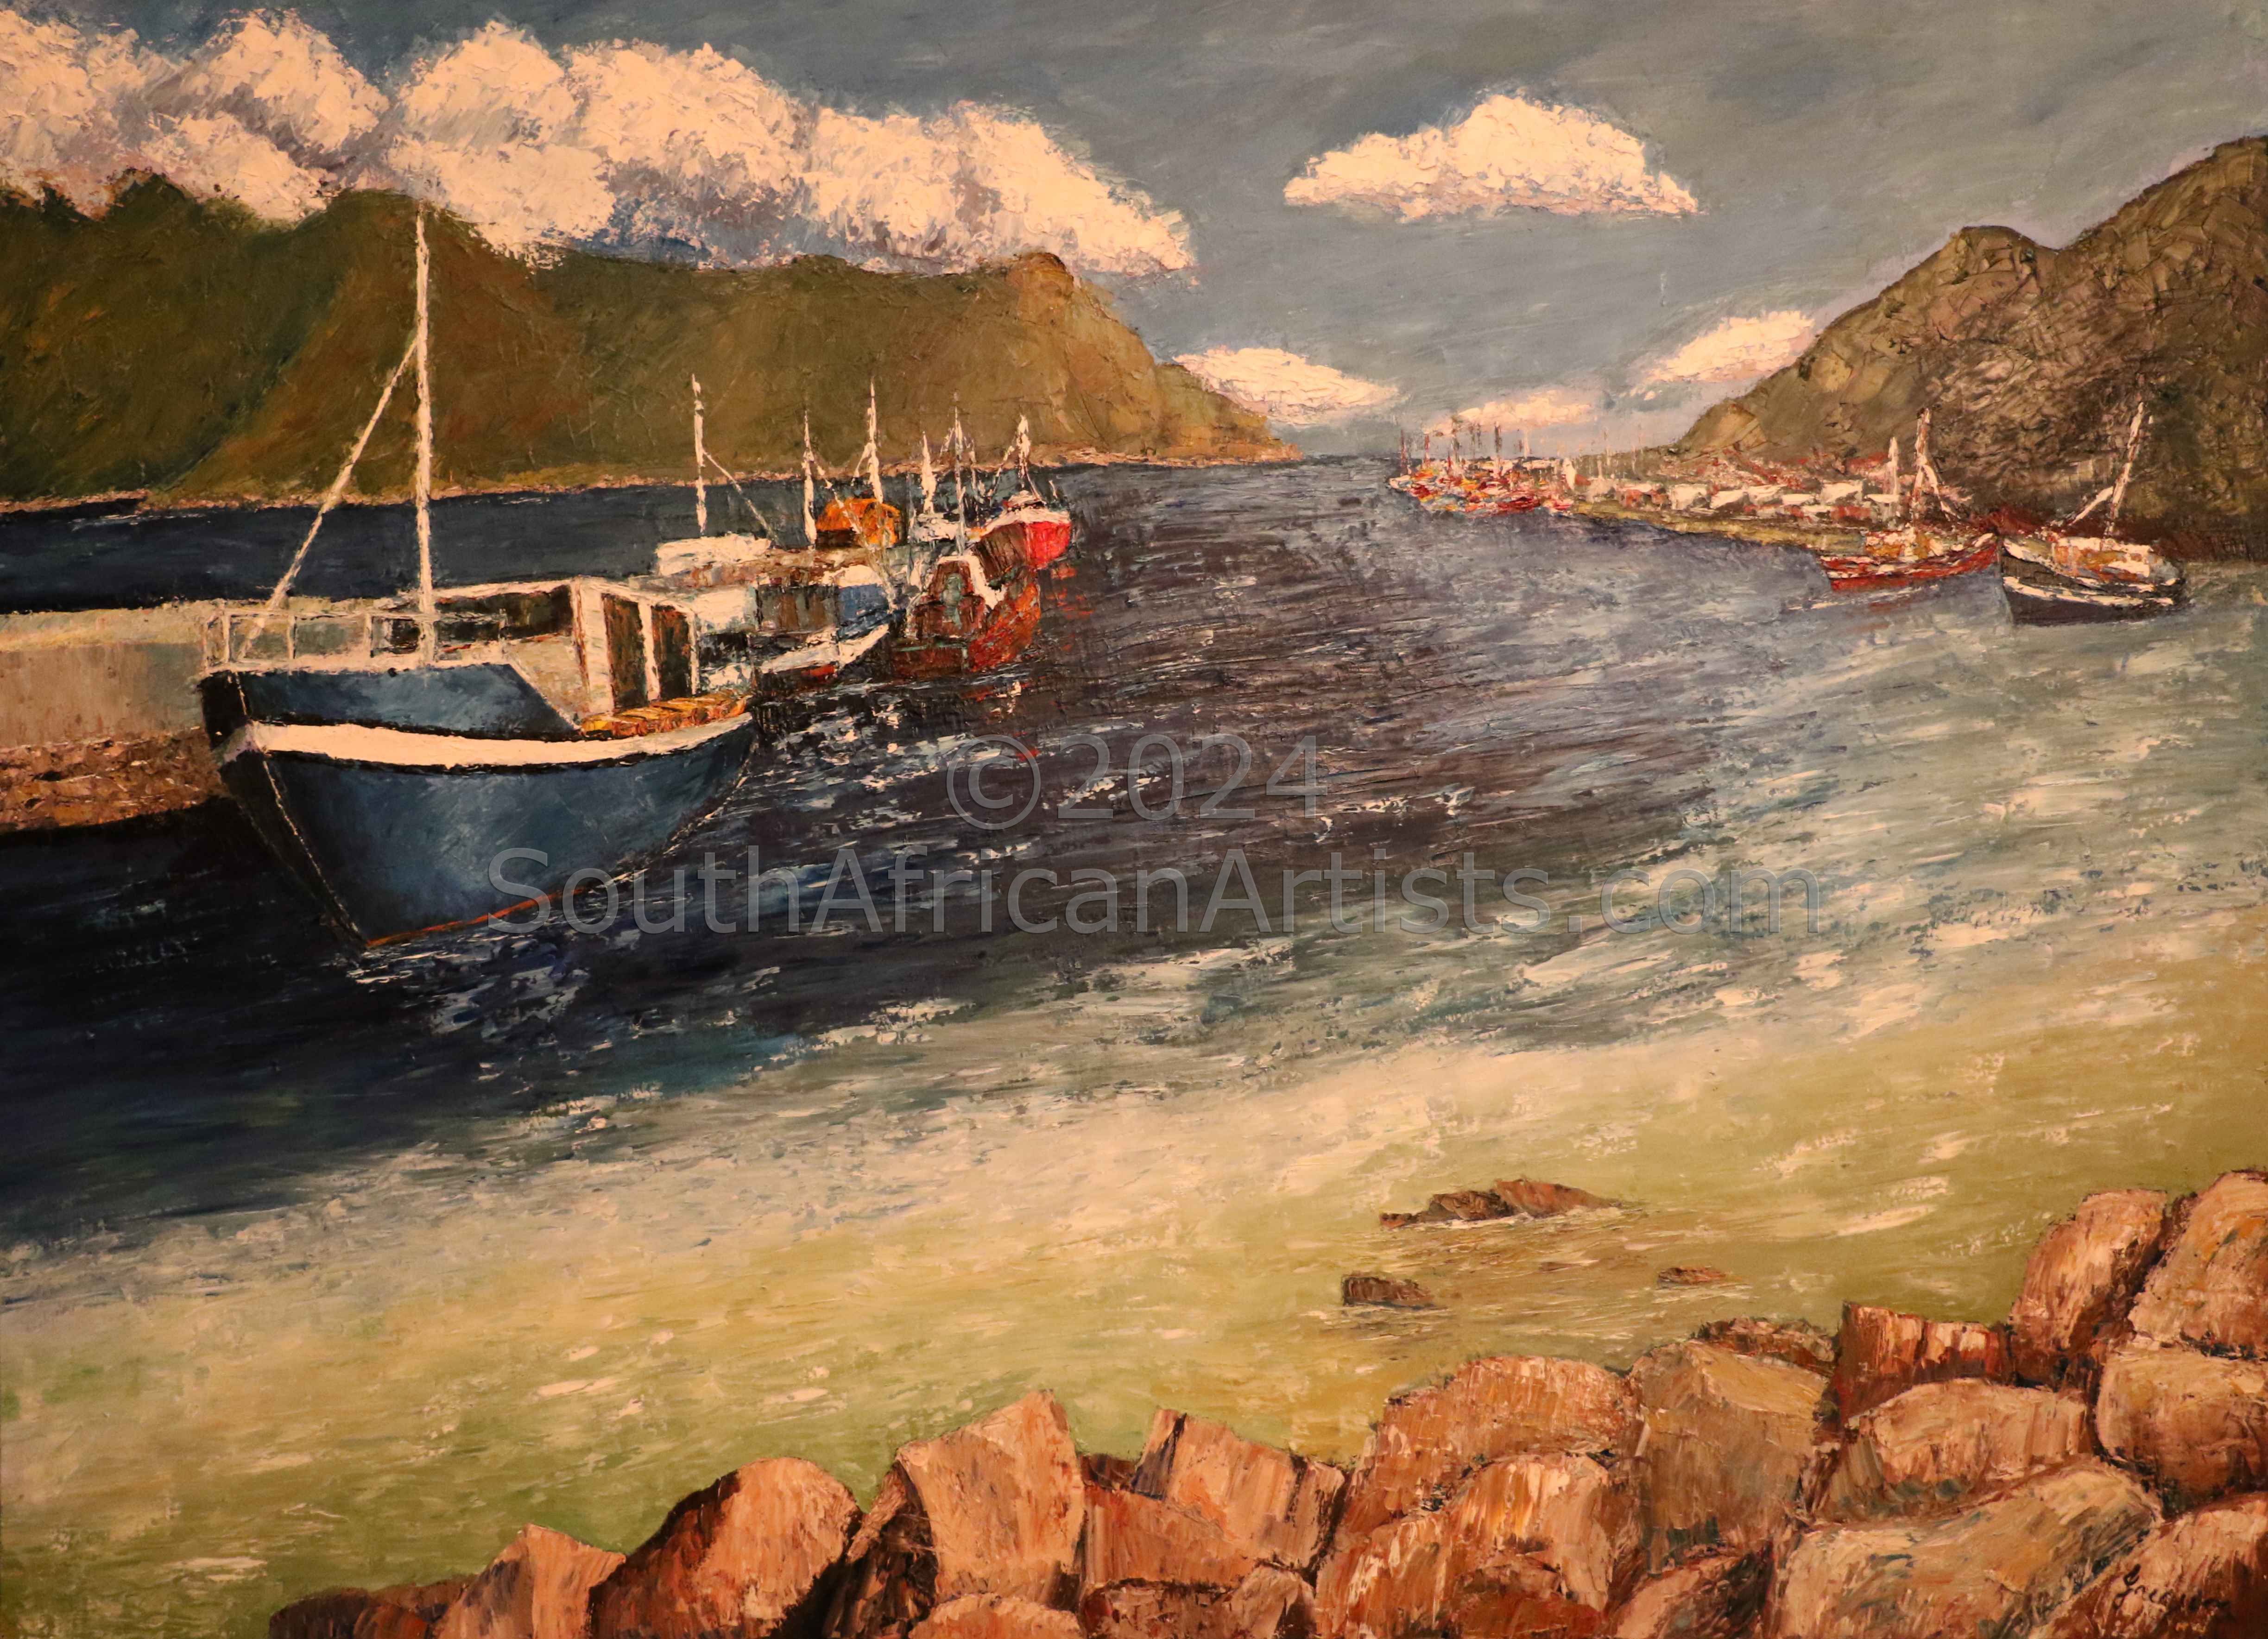 Tranquillity (Houtbay Harbour)